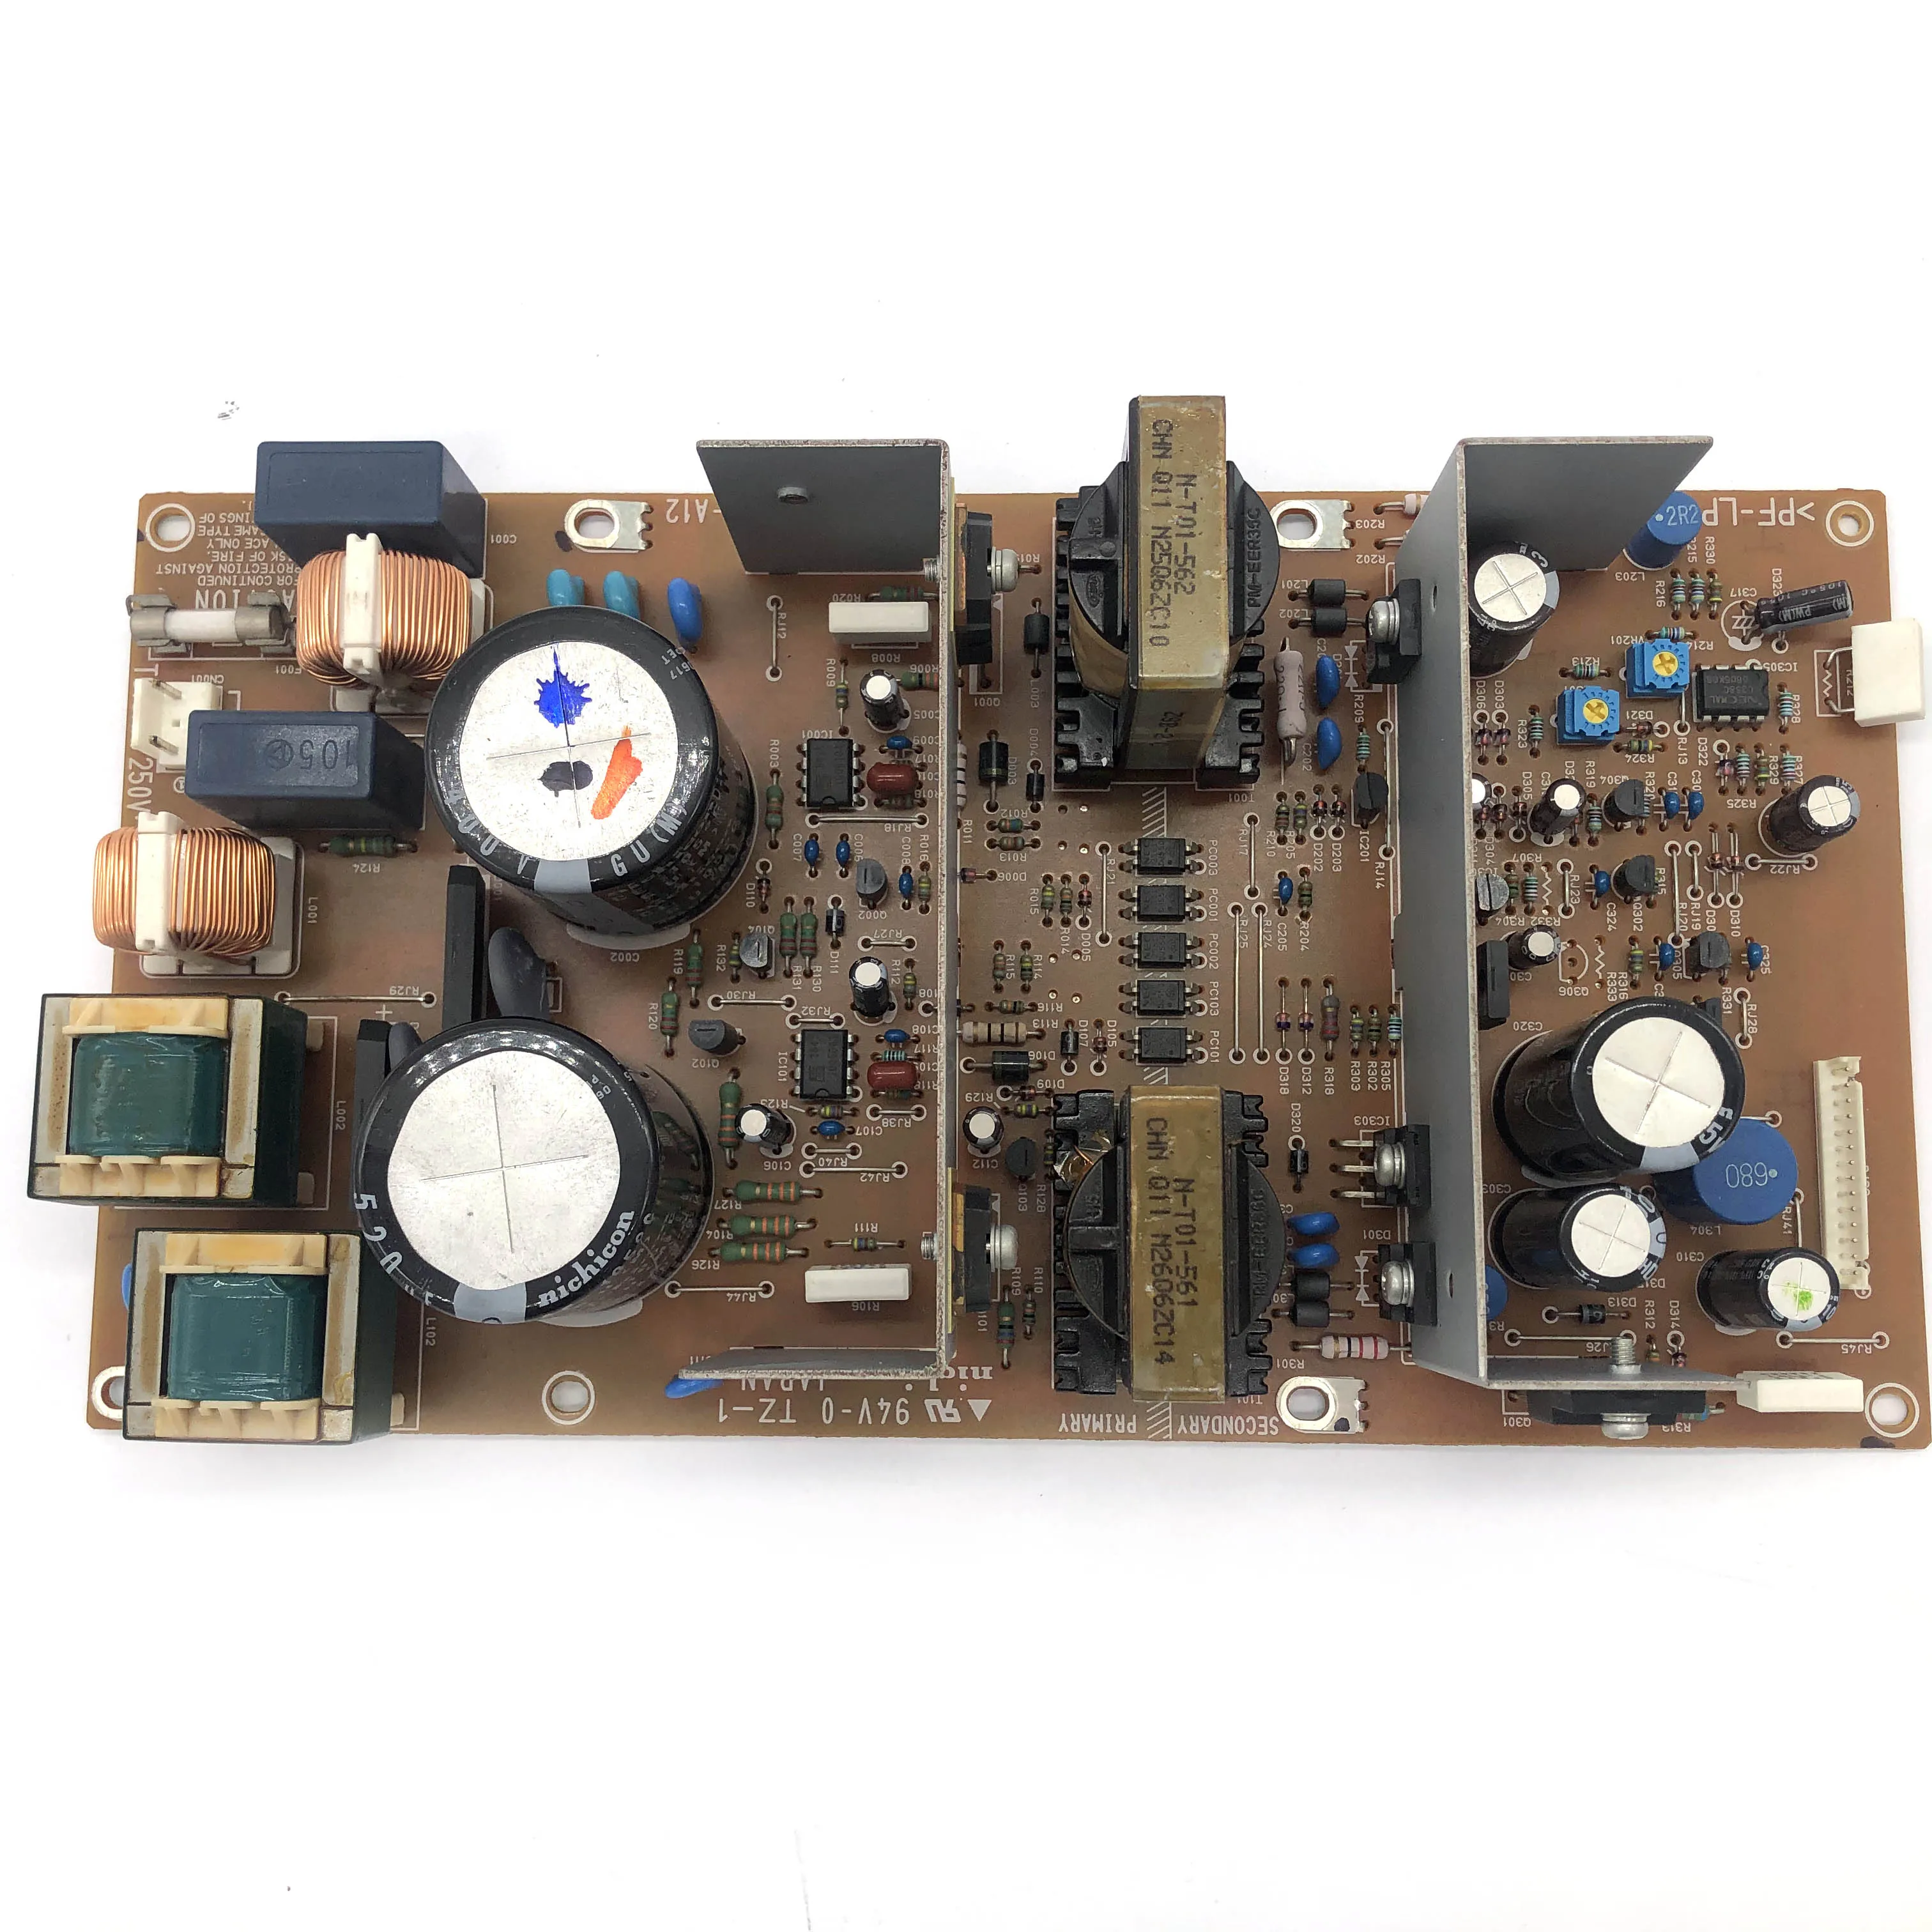 

Power Supply Board Fits For EPSON stylus Pro 7400 7880C 7800 9800 7880 7450 9500